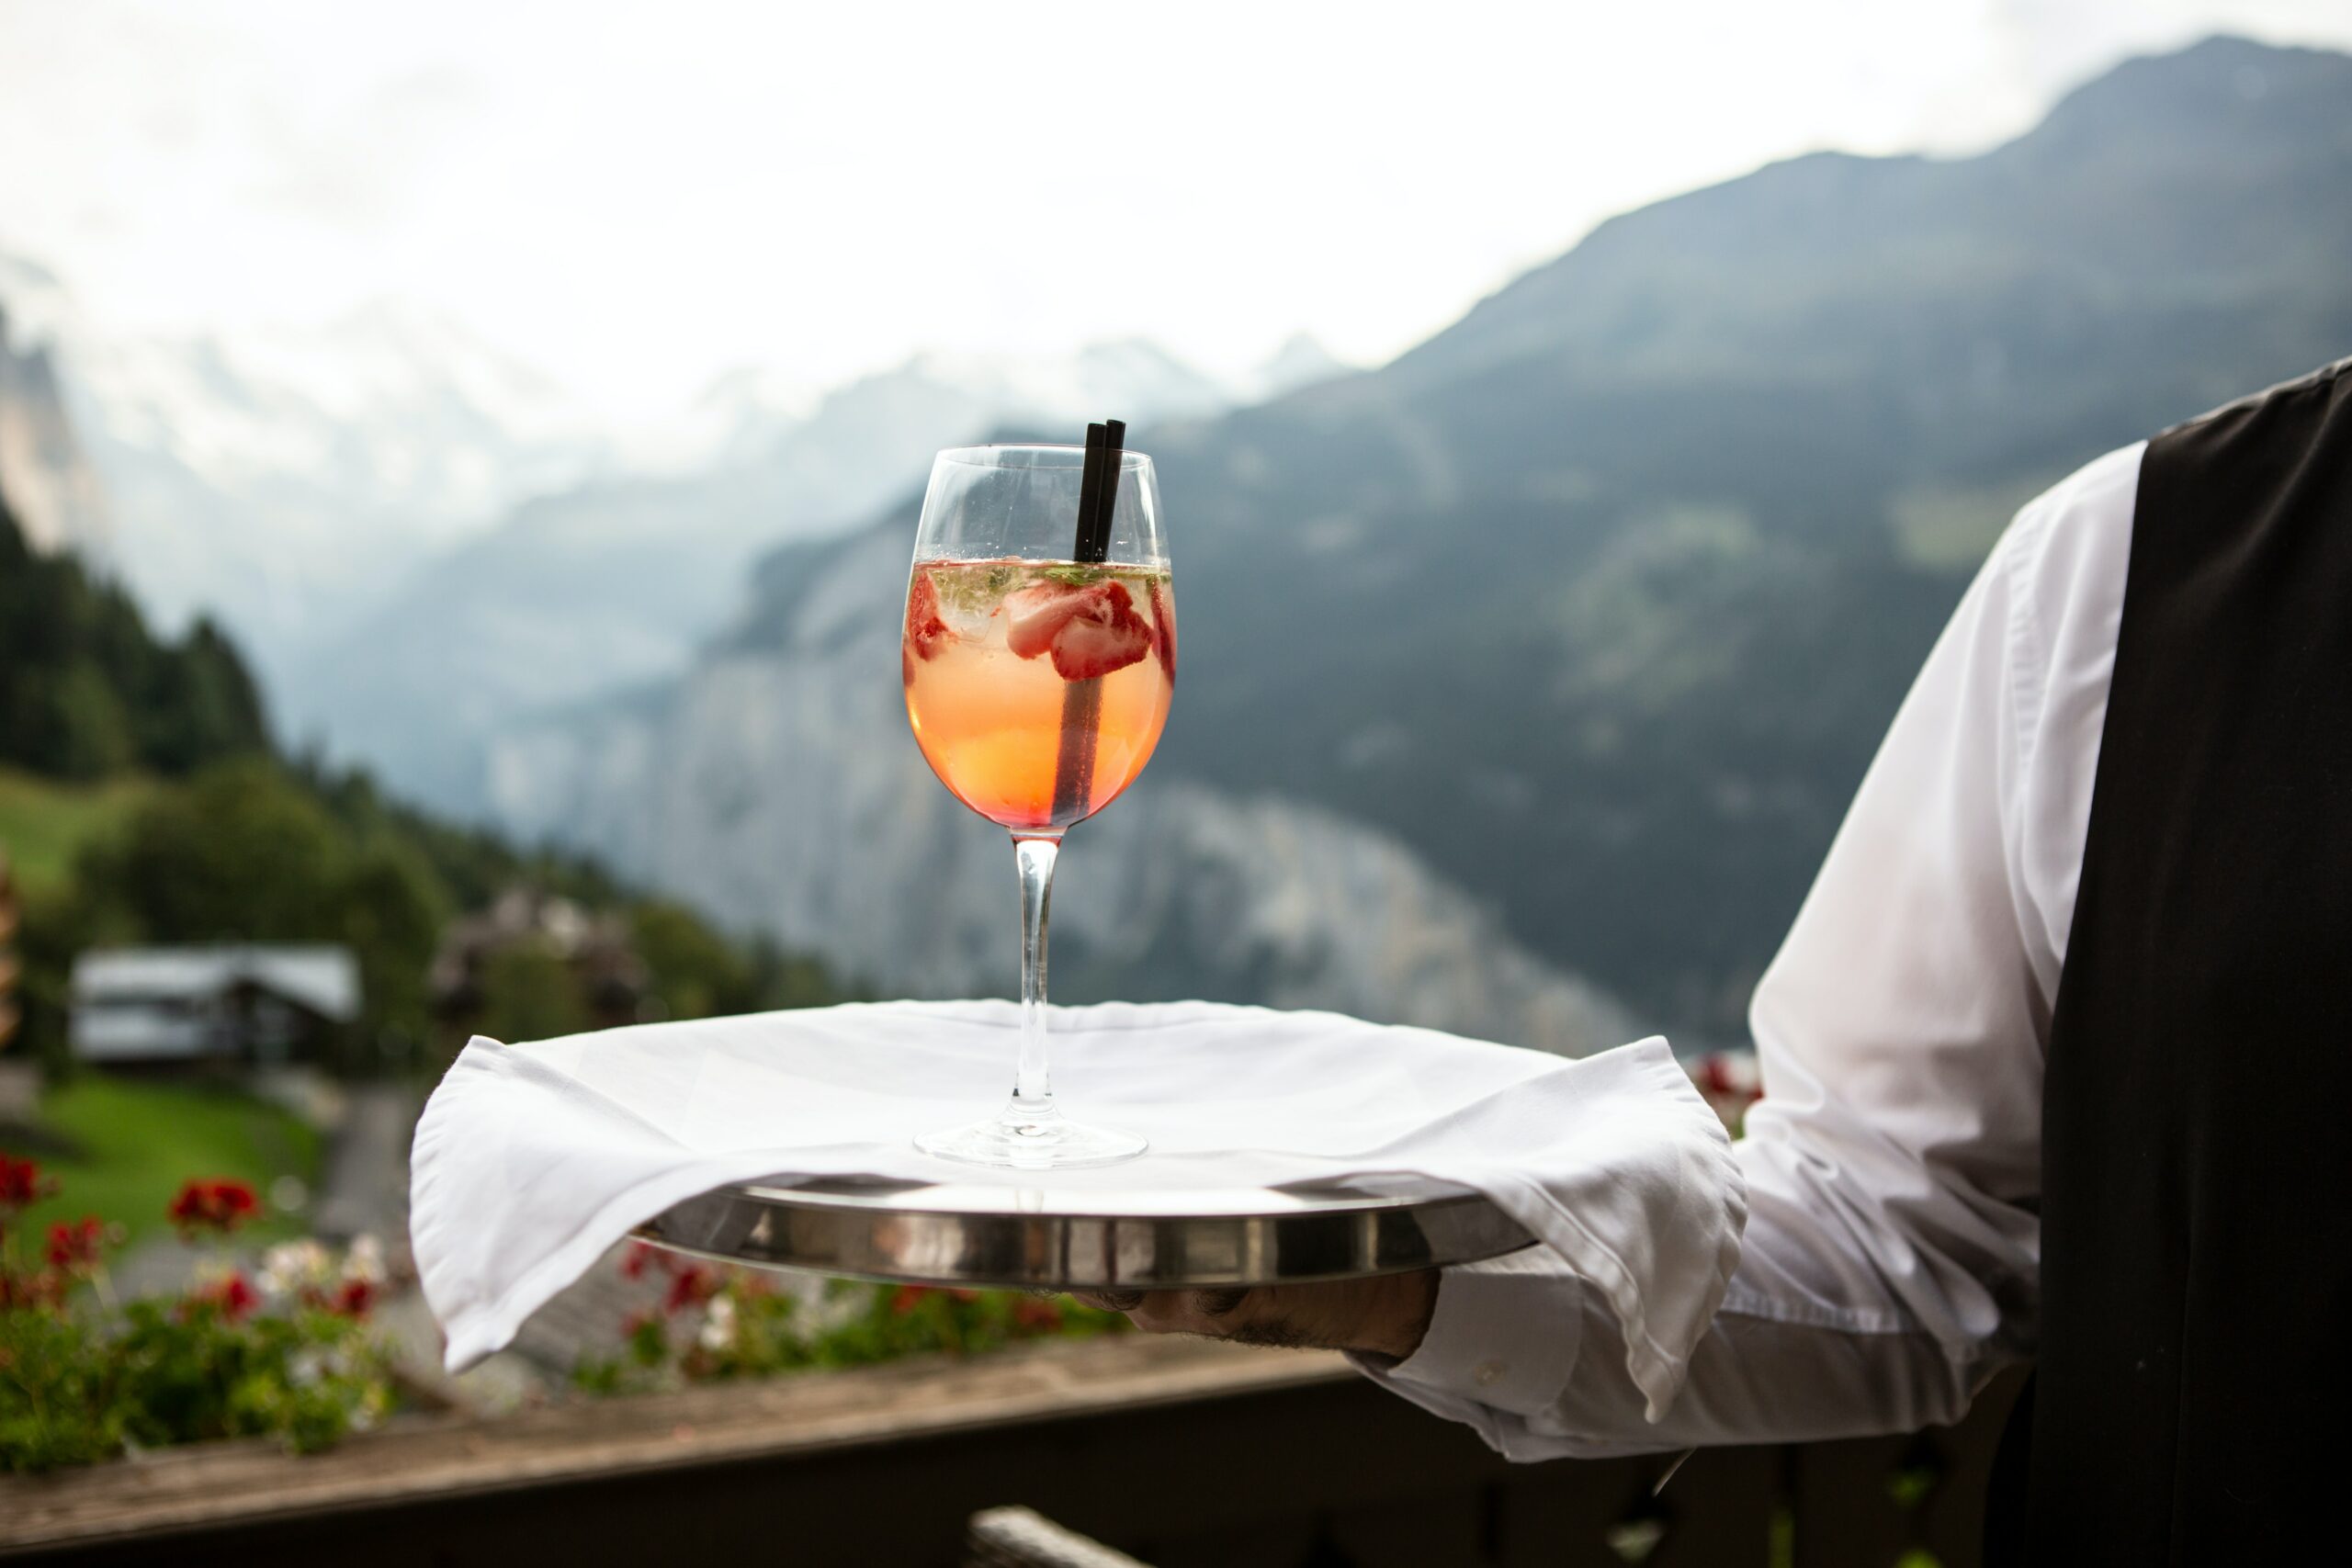 Omicron affecting Hotels and Hospitality workforce in Switzerland